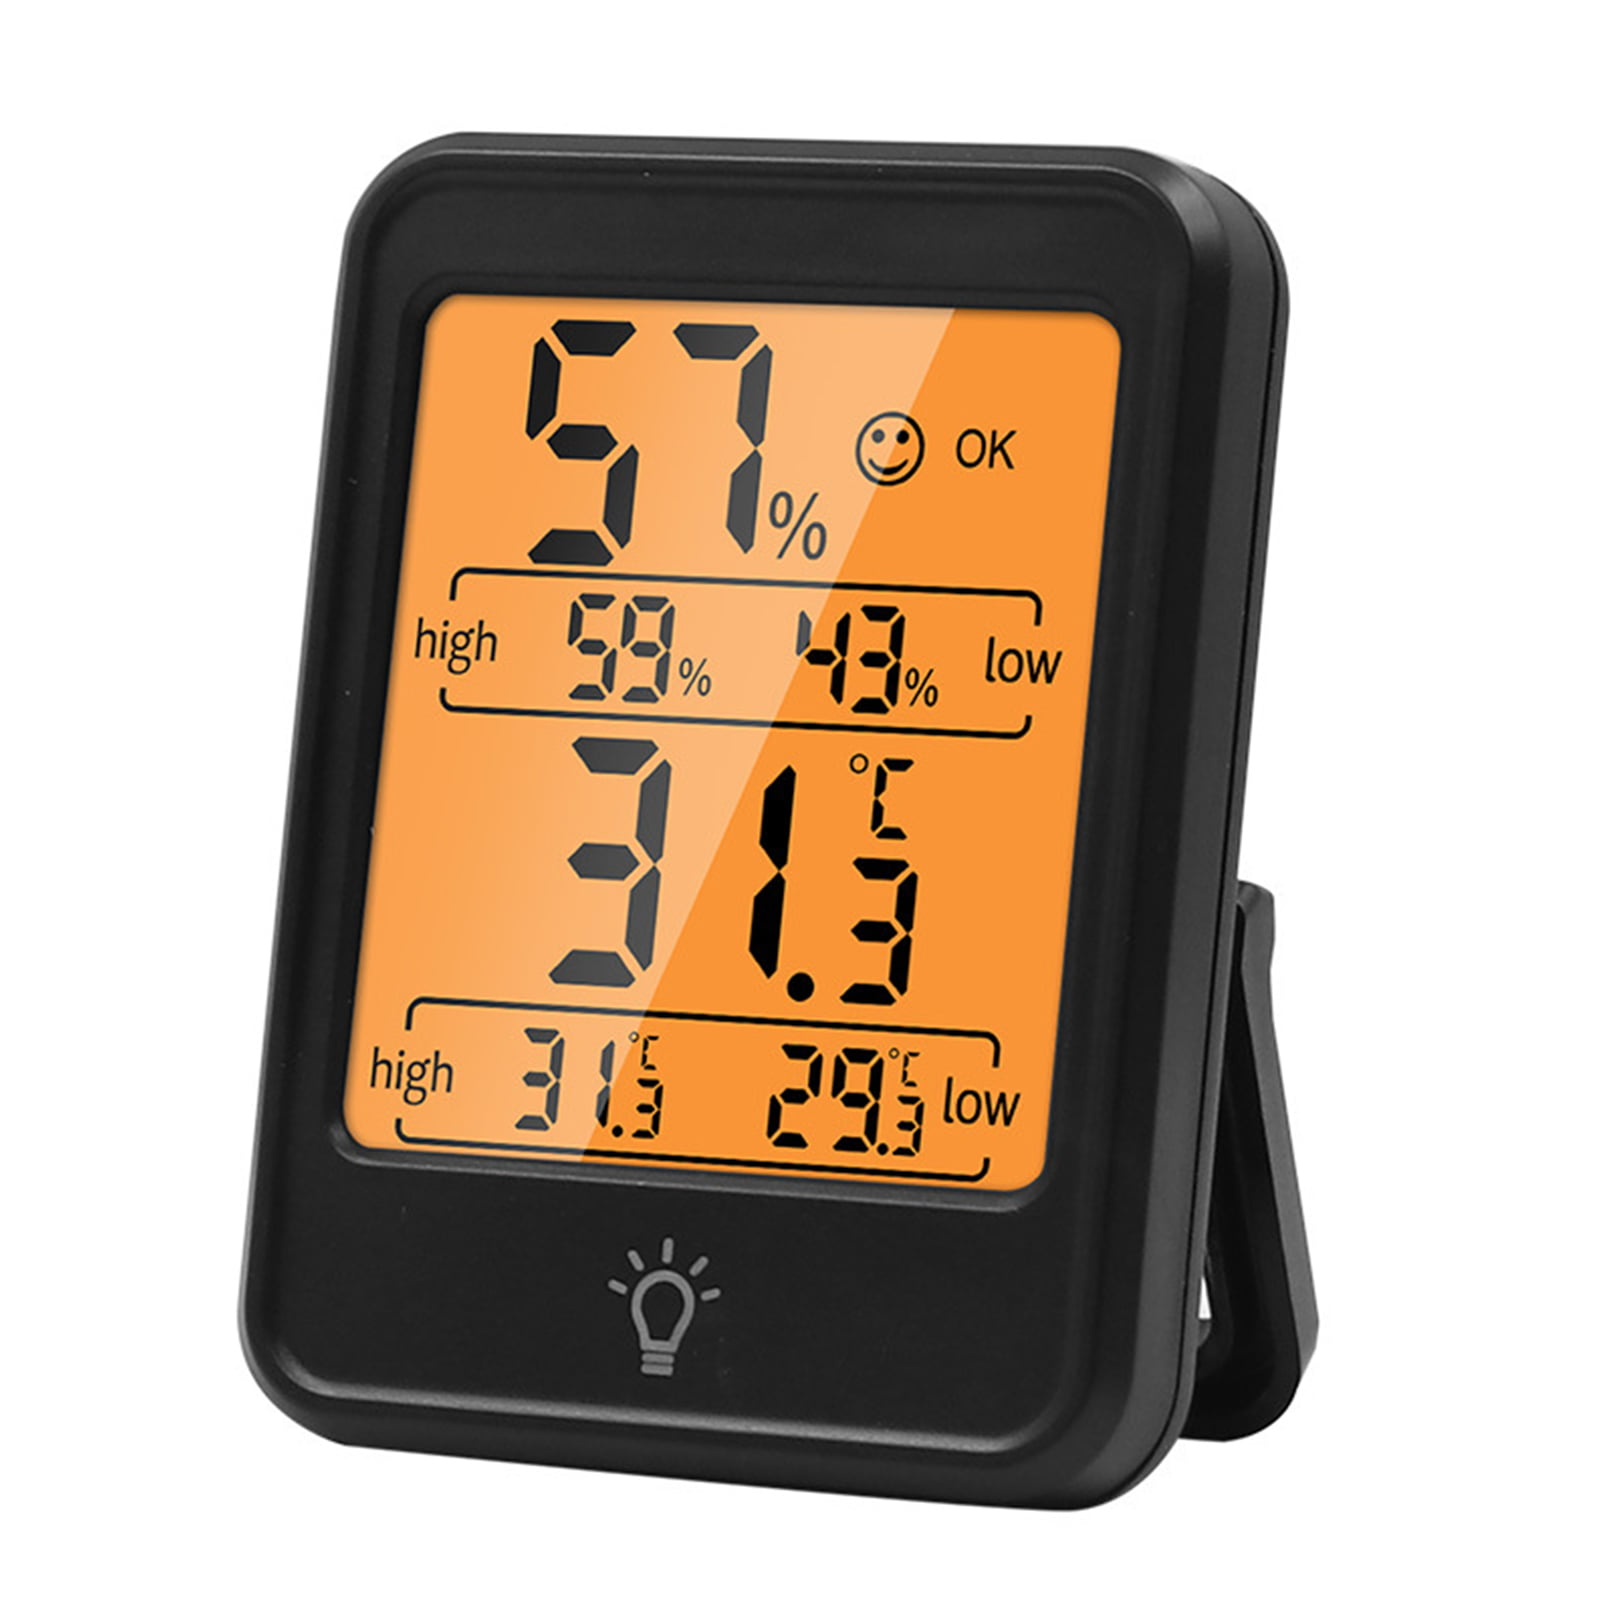 ThermoPro TP157W Hygrometer Indoor Thermometer for Home, Room